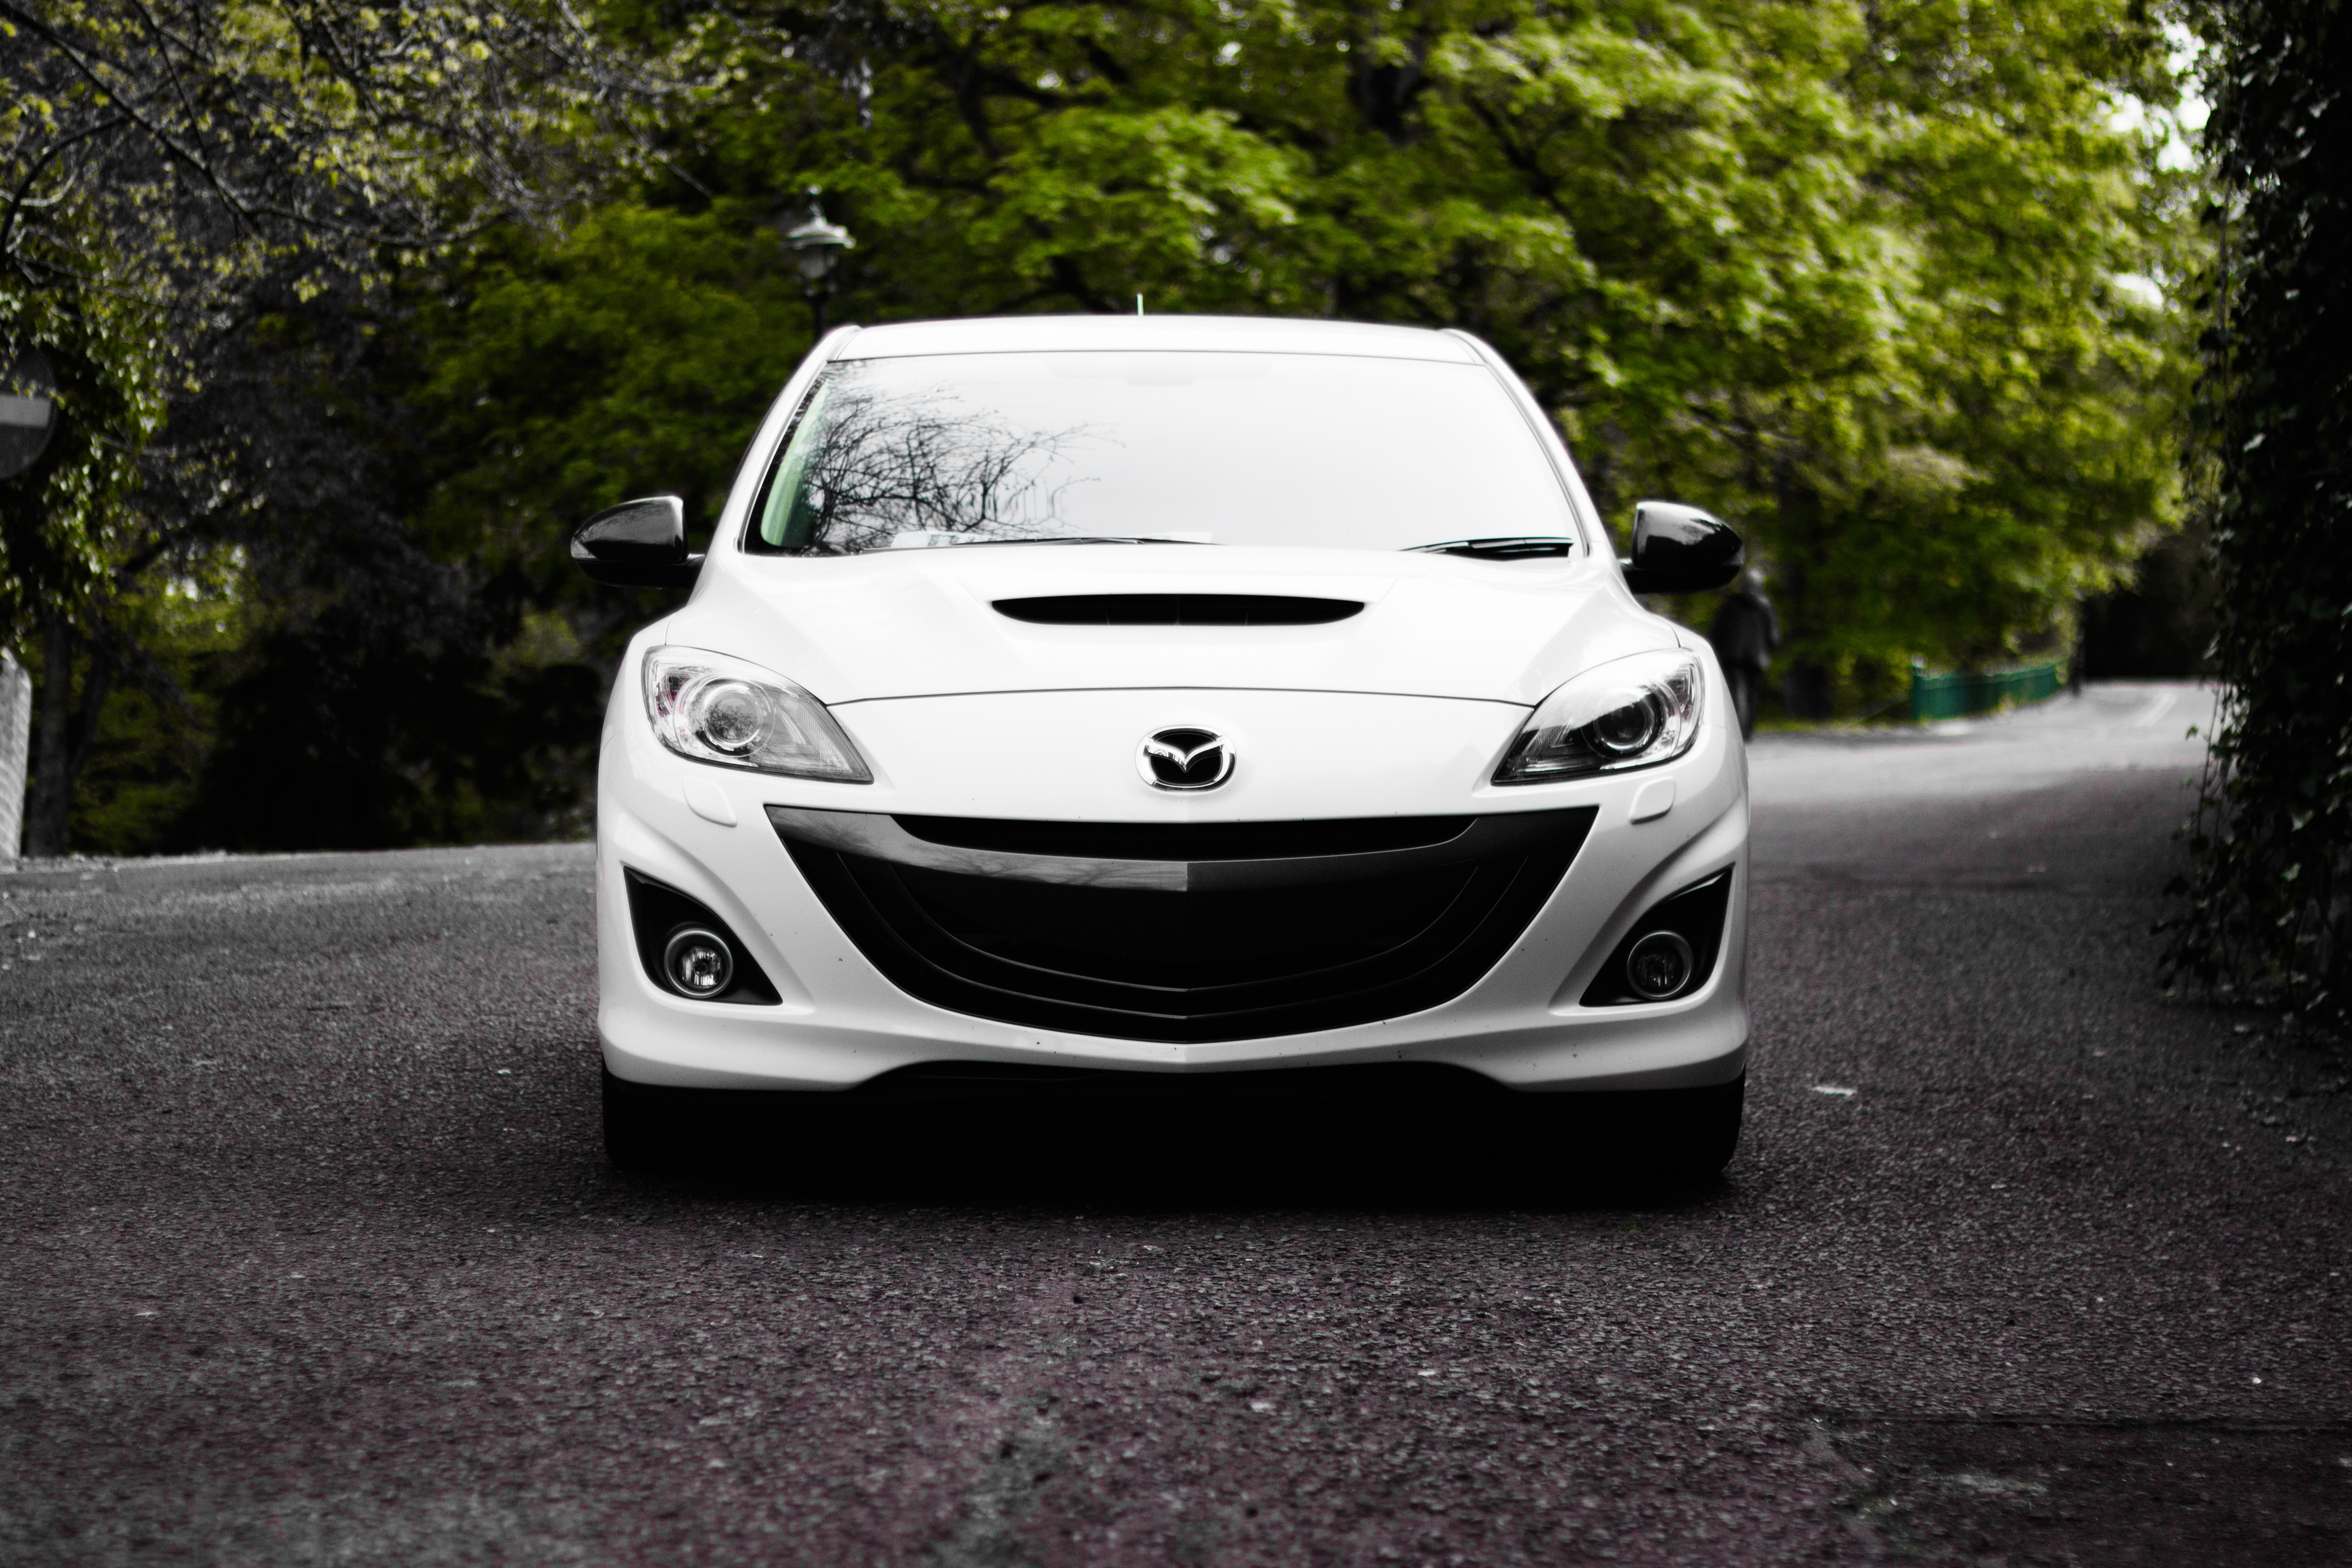 New Lock Screen Wallpapers mazda, cars, white, front view